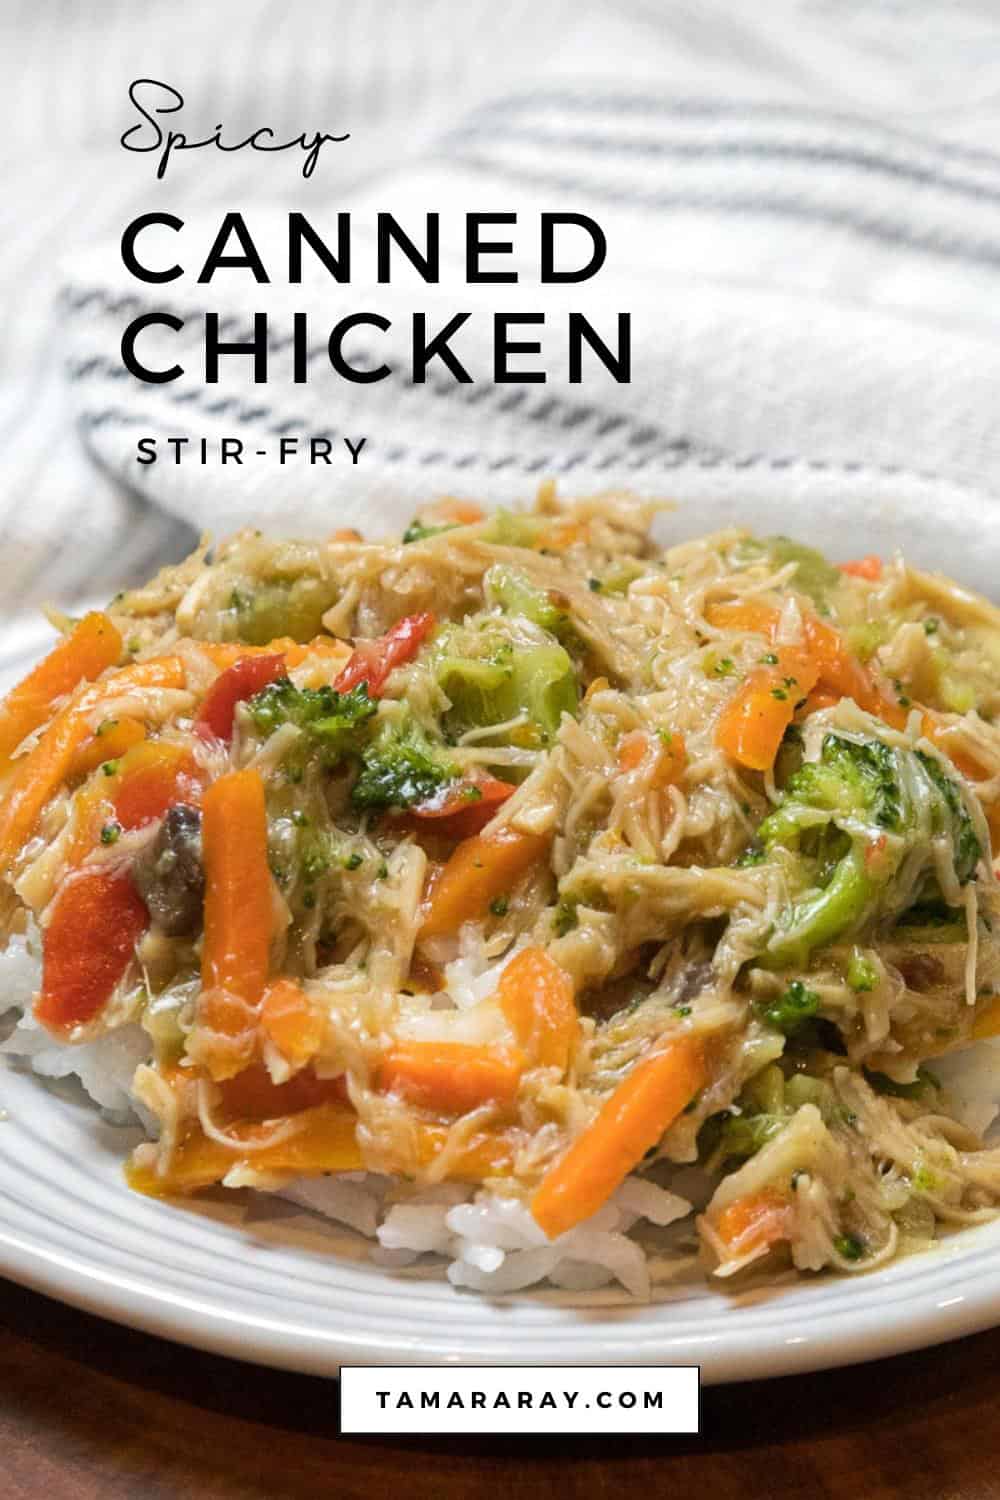 Pin image for chicken stir fry.